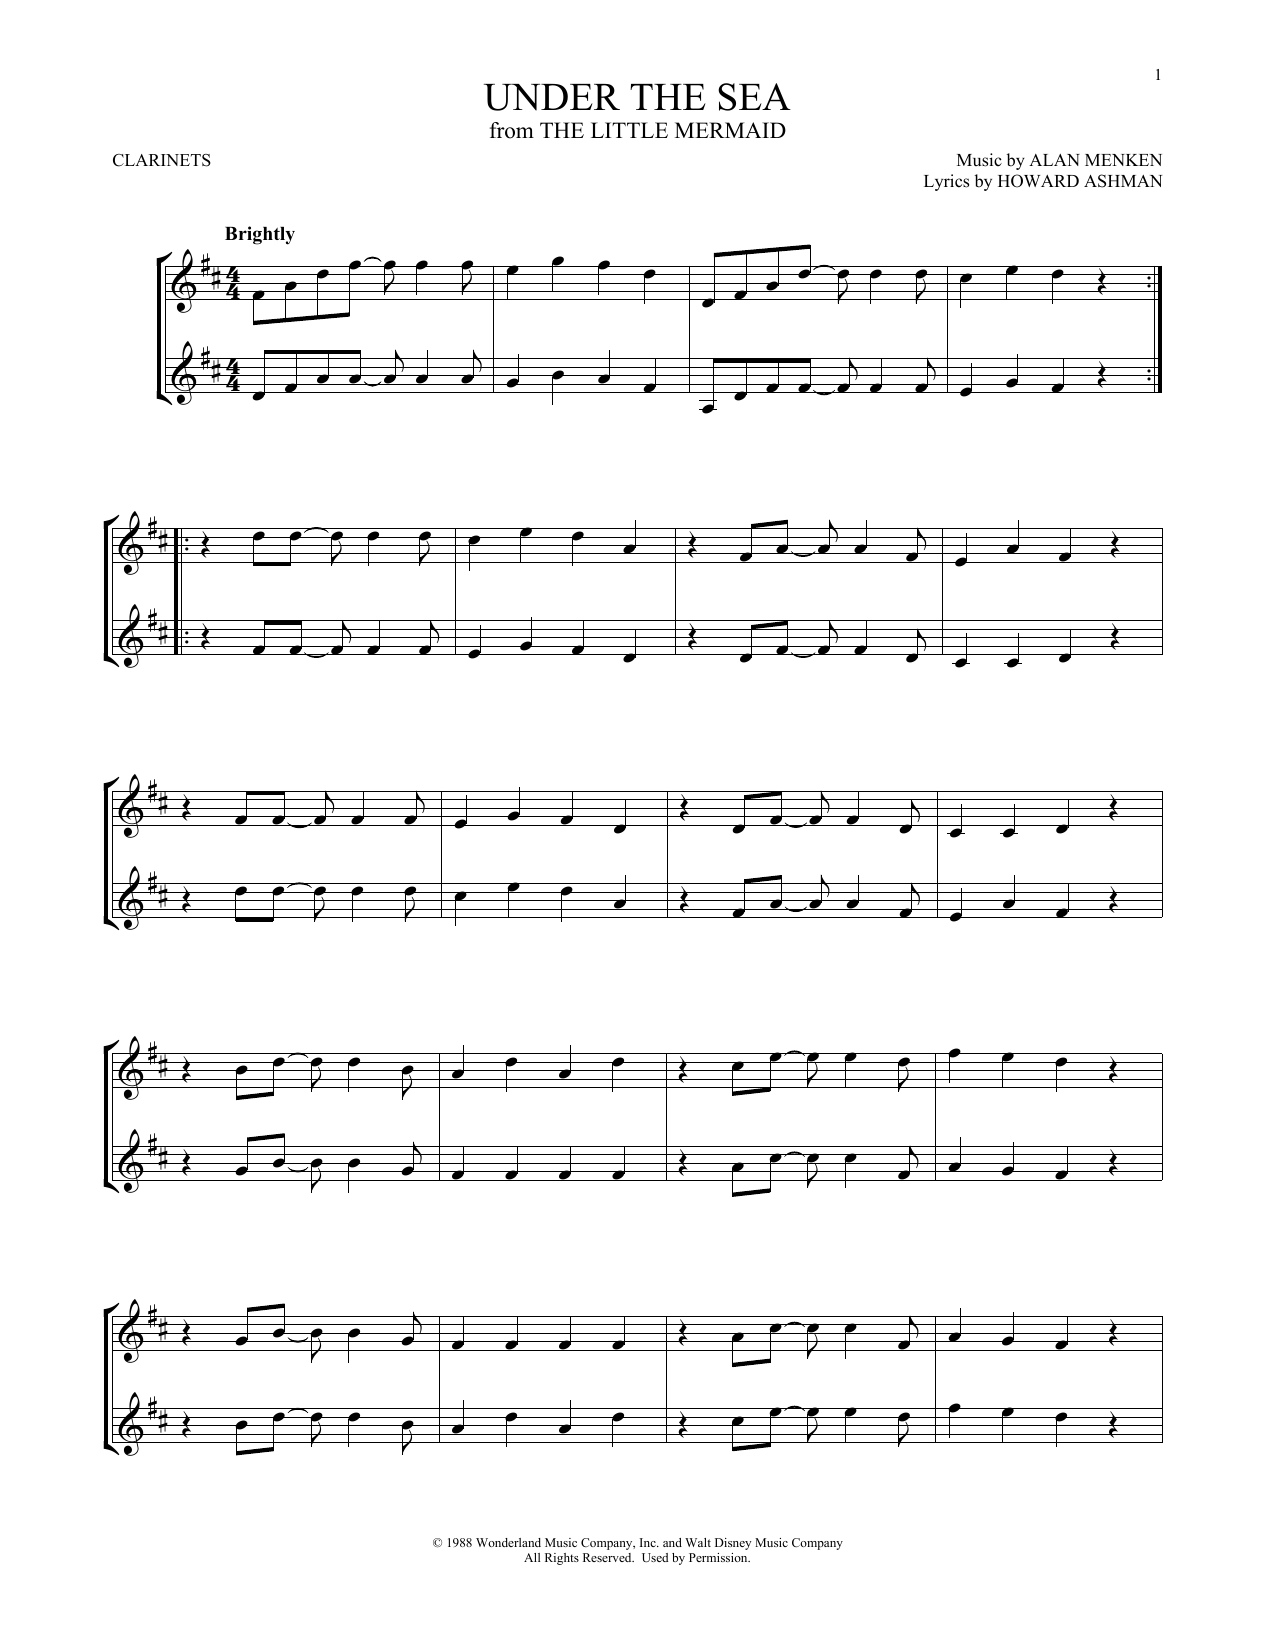 Alan Menken & Howard Ashman Under The Sea (from The Little Mermaid) sheet music notes and chords. Download Printable PDF.